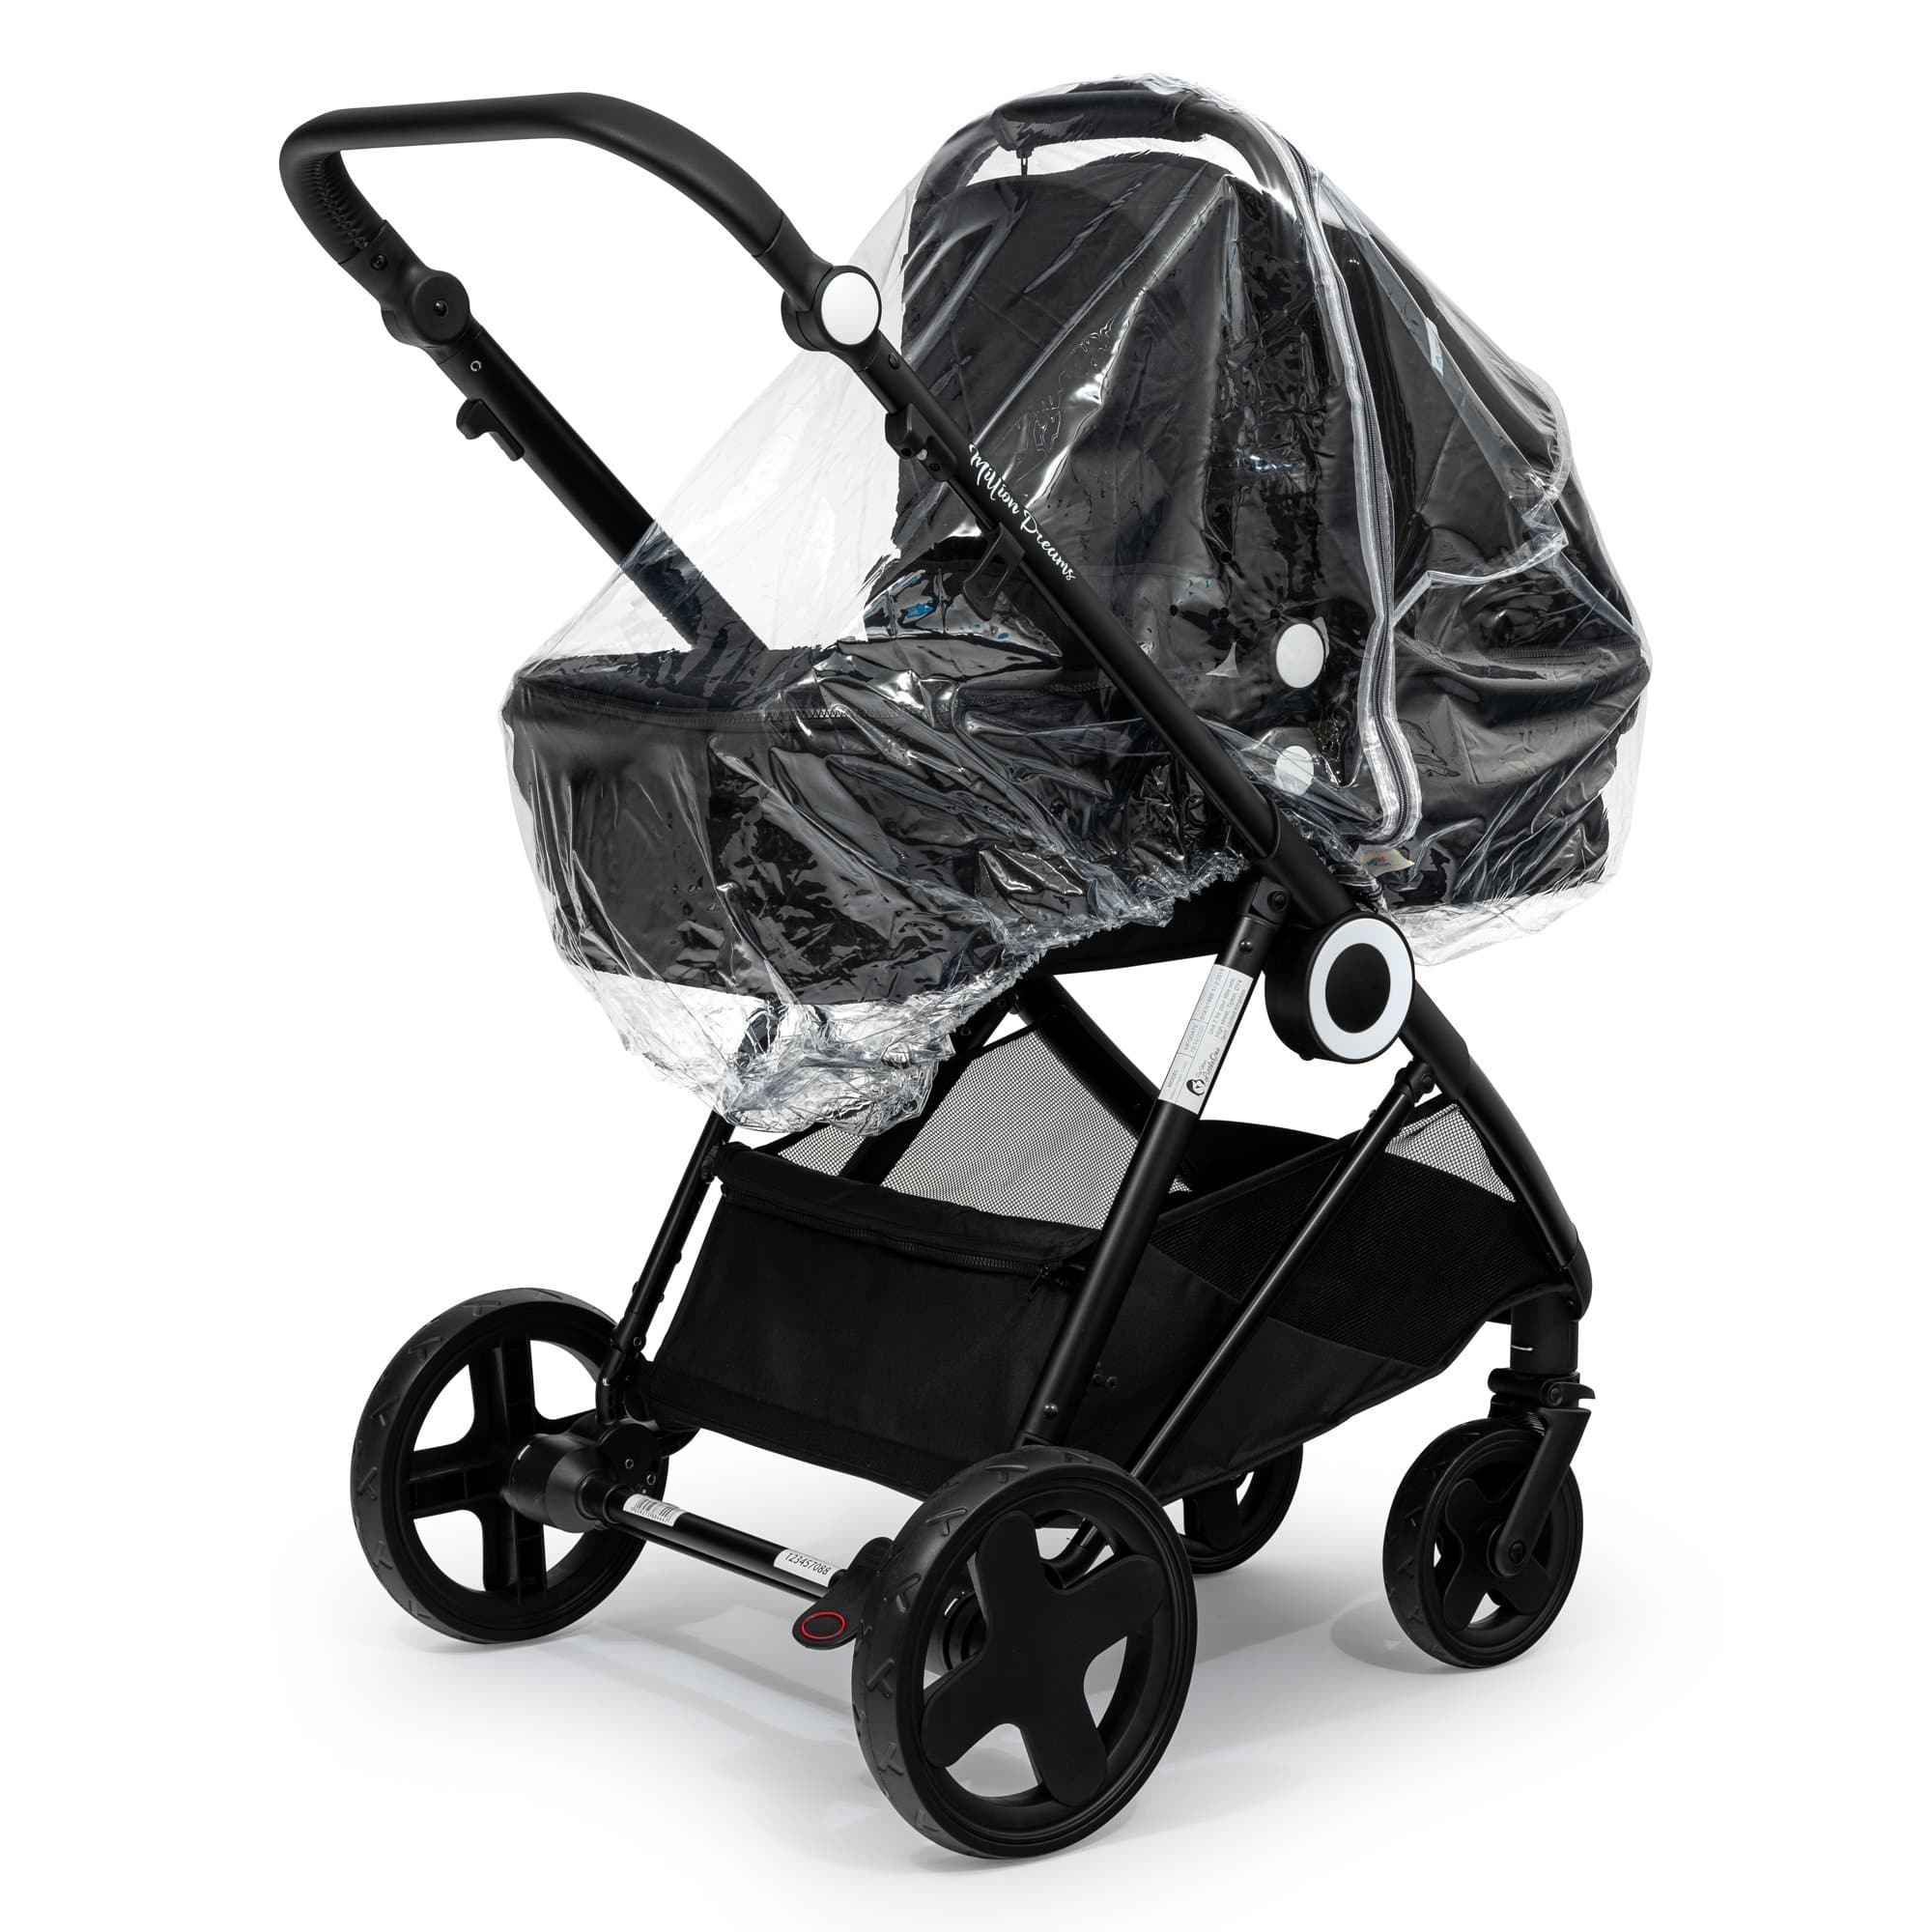 2 in 1 Rain Cover Compatible with My Babiie - Fits All Models - For Your Little One